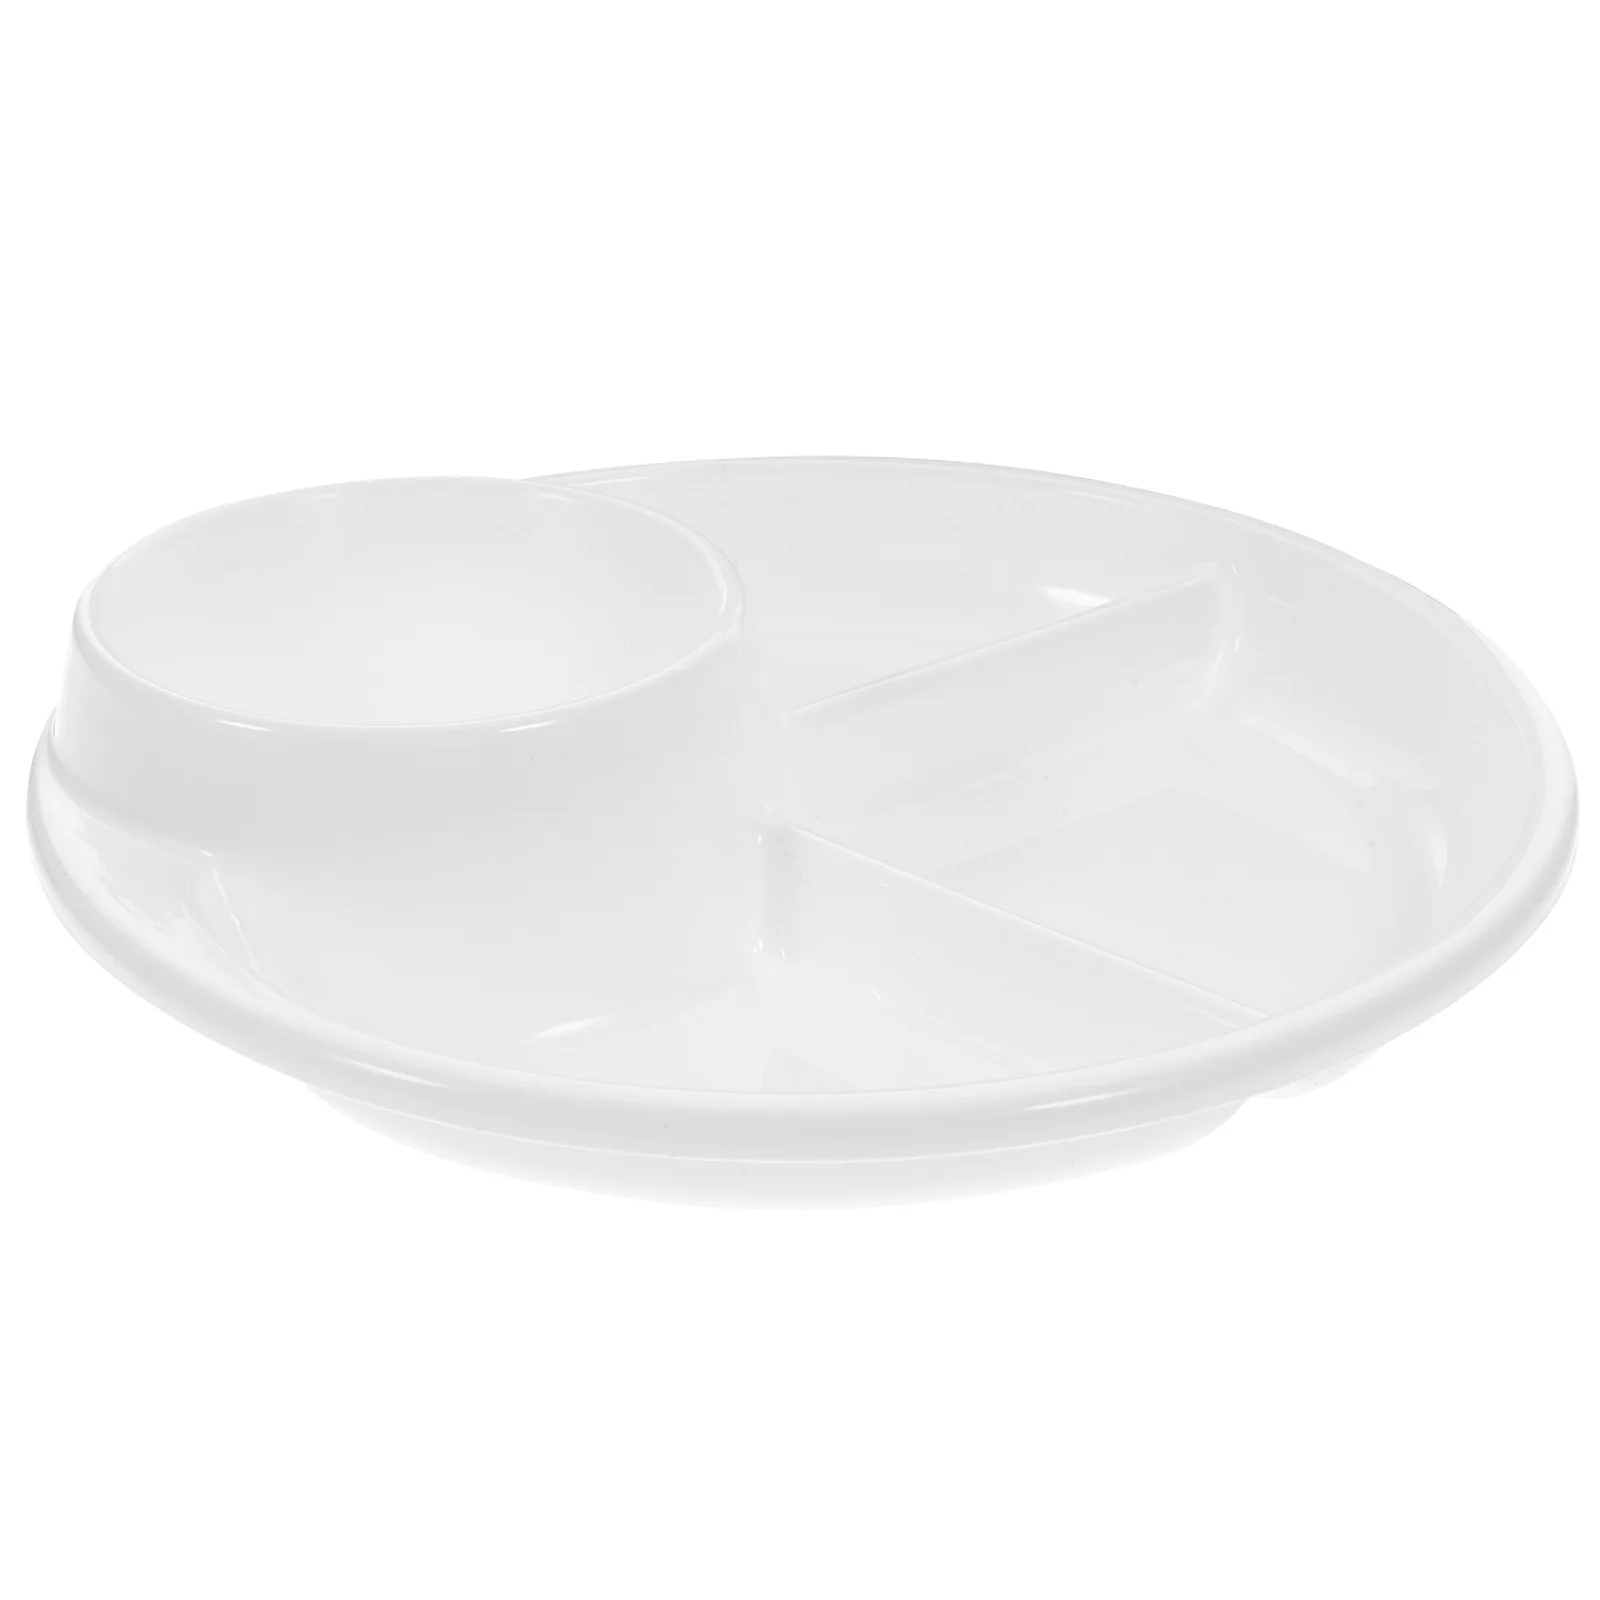 

Divided Plate Plates Serving Food Tray Dish Plastic Dinner Compartment Trays Dessert Portion Breakfast Fruit Salad Appetizer